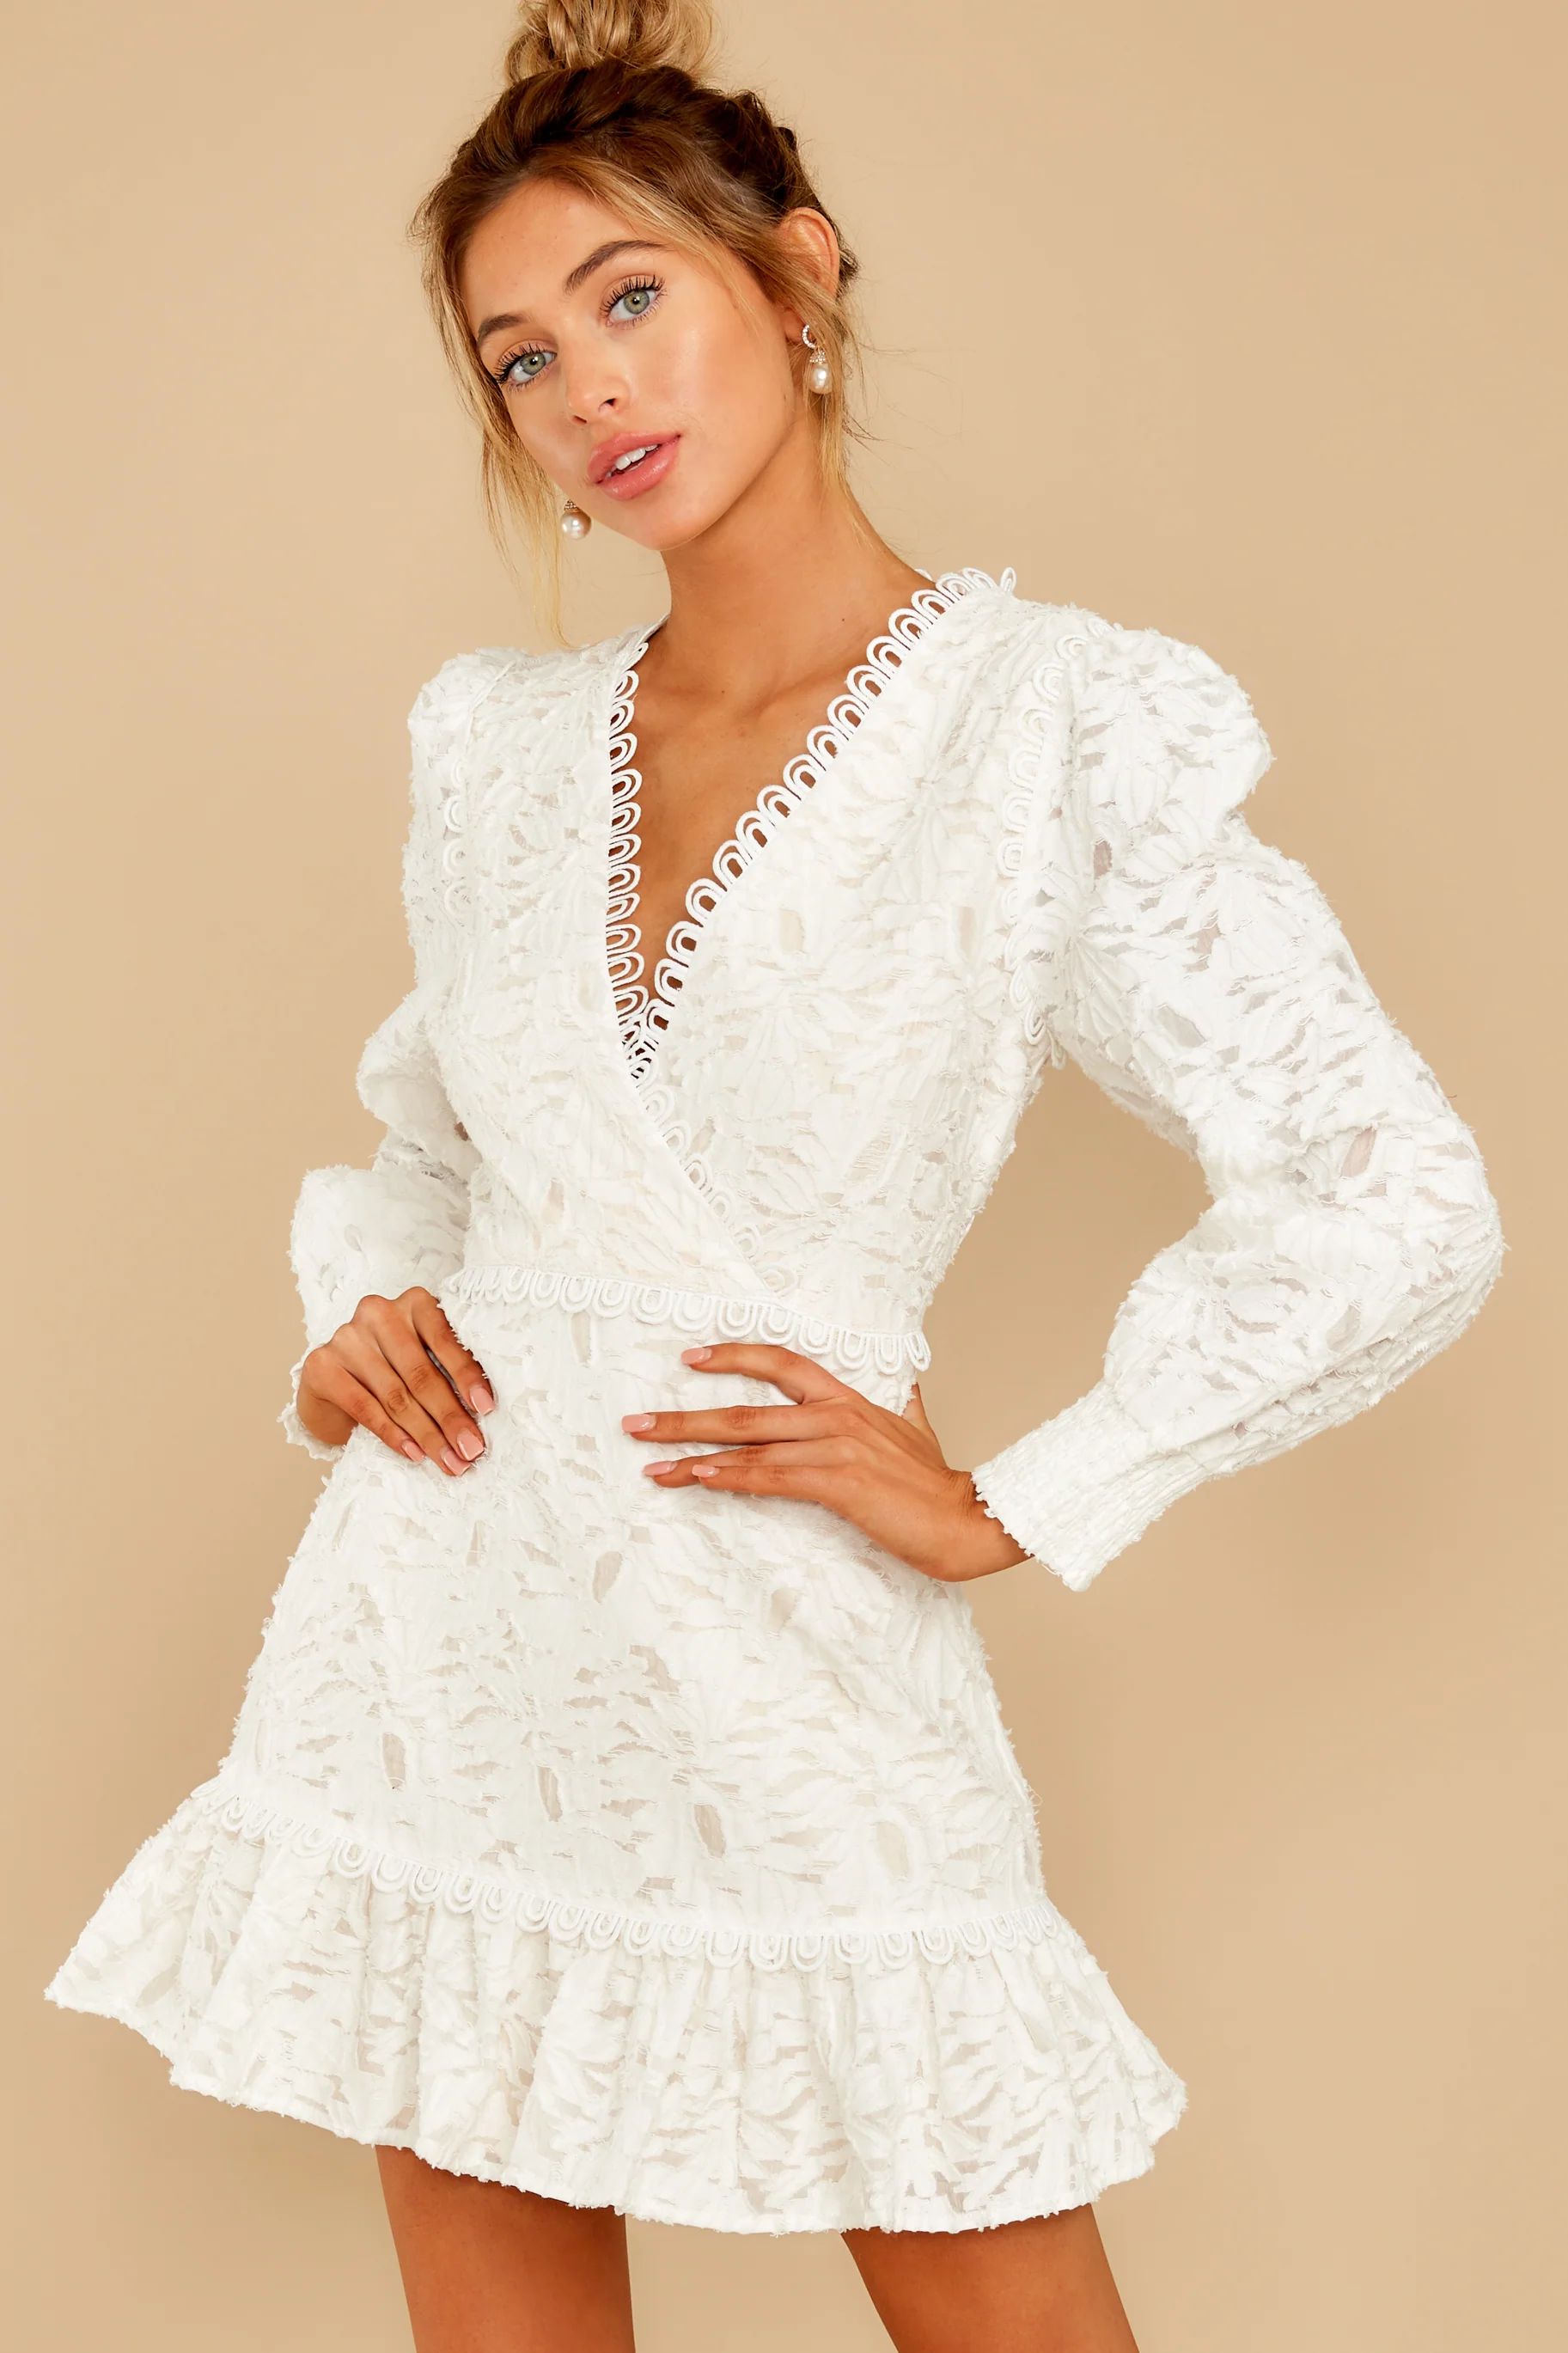 May This Be Love White Lace Dress | Red Dress 